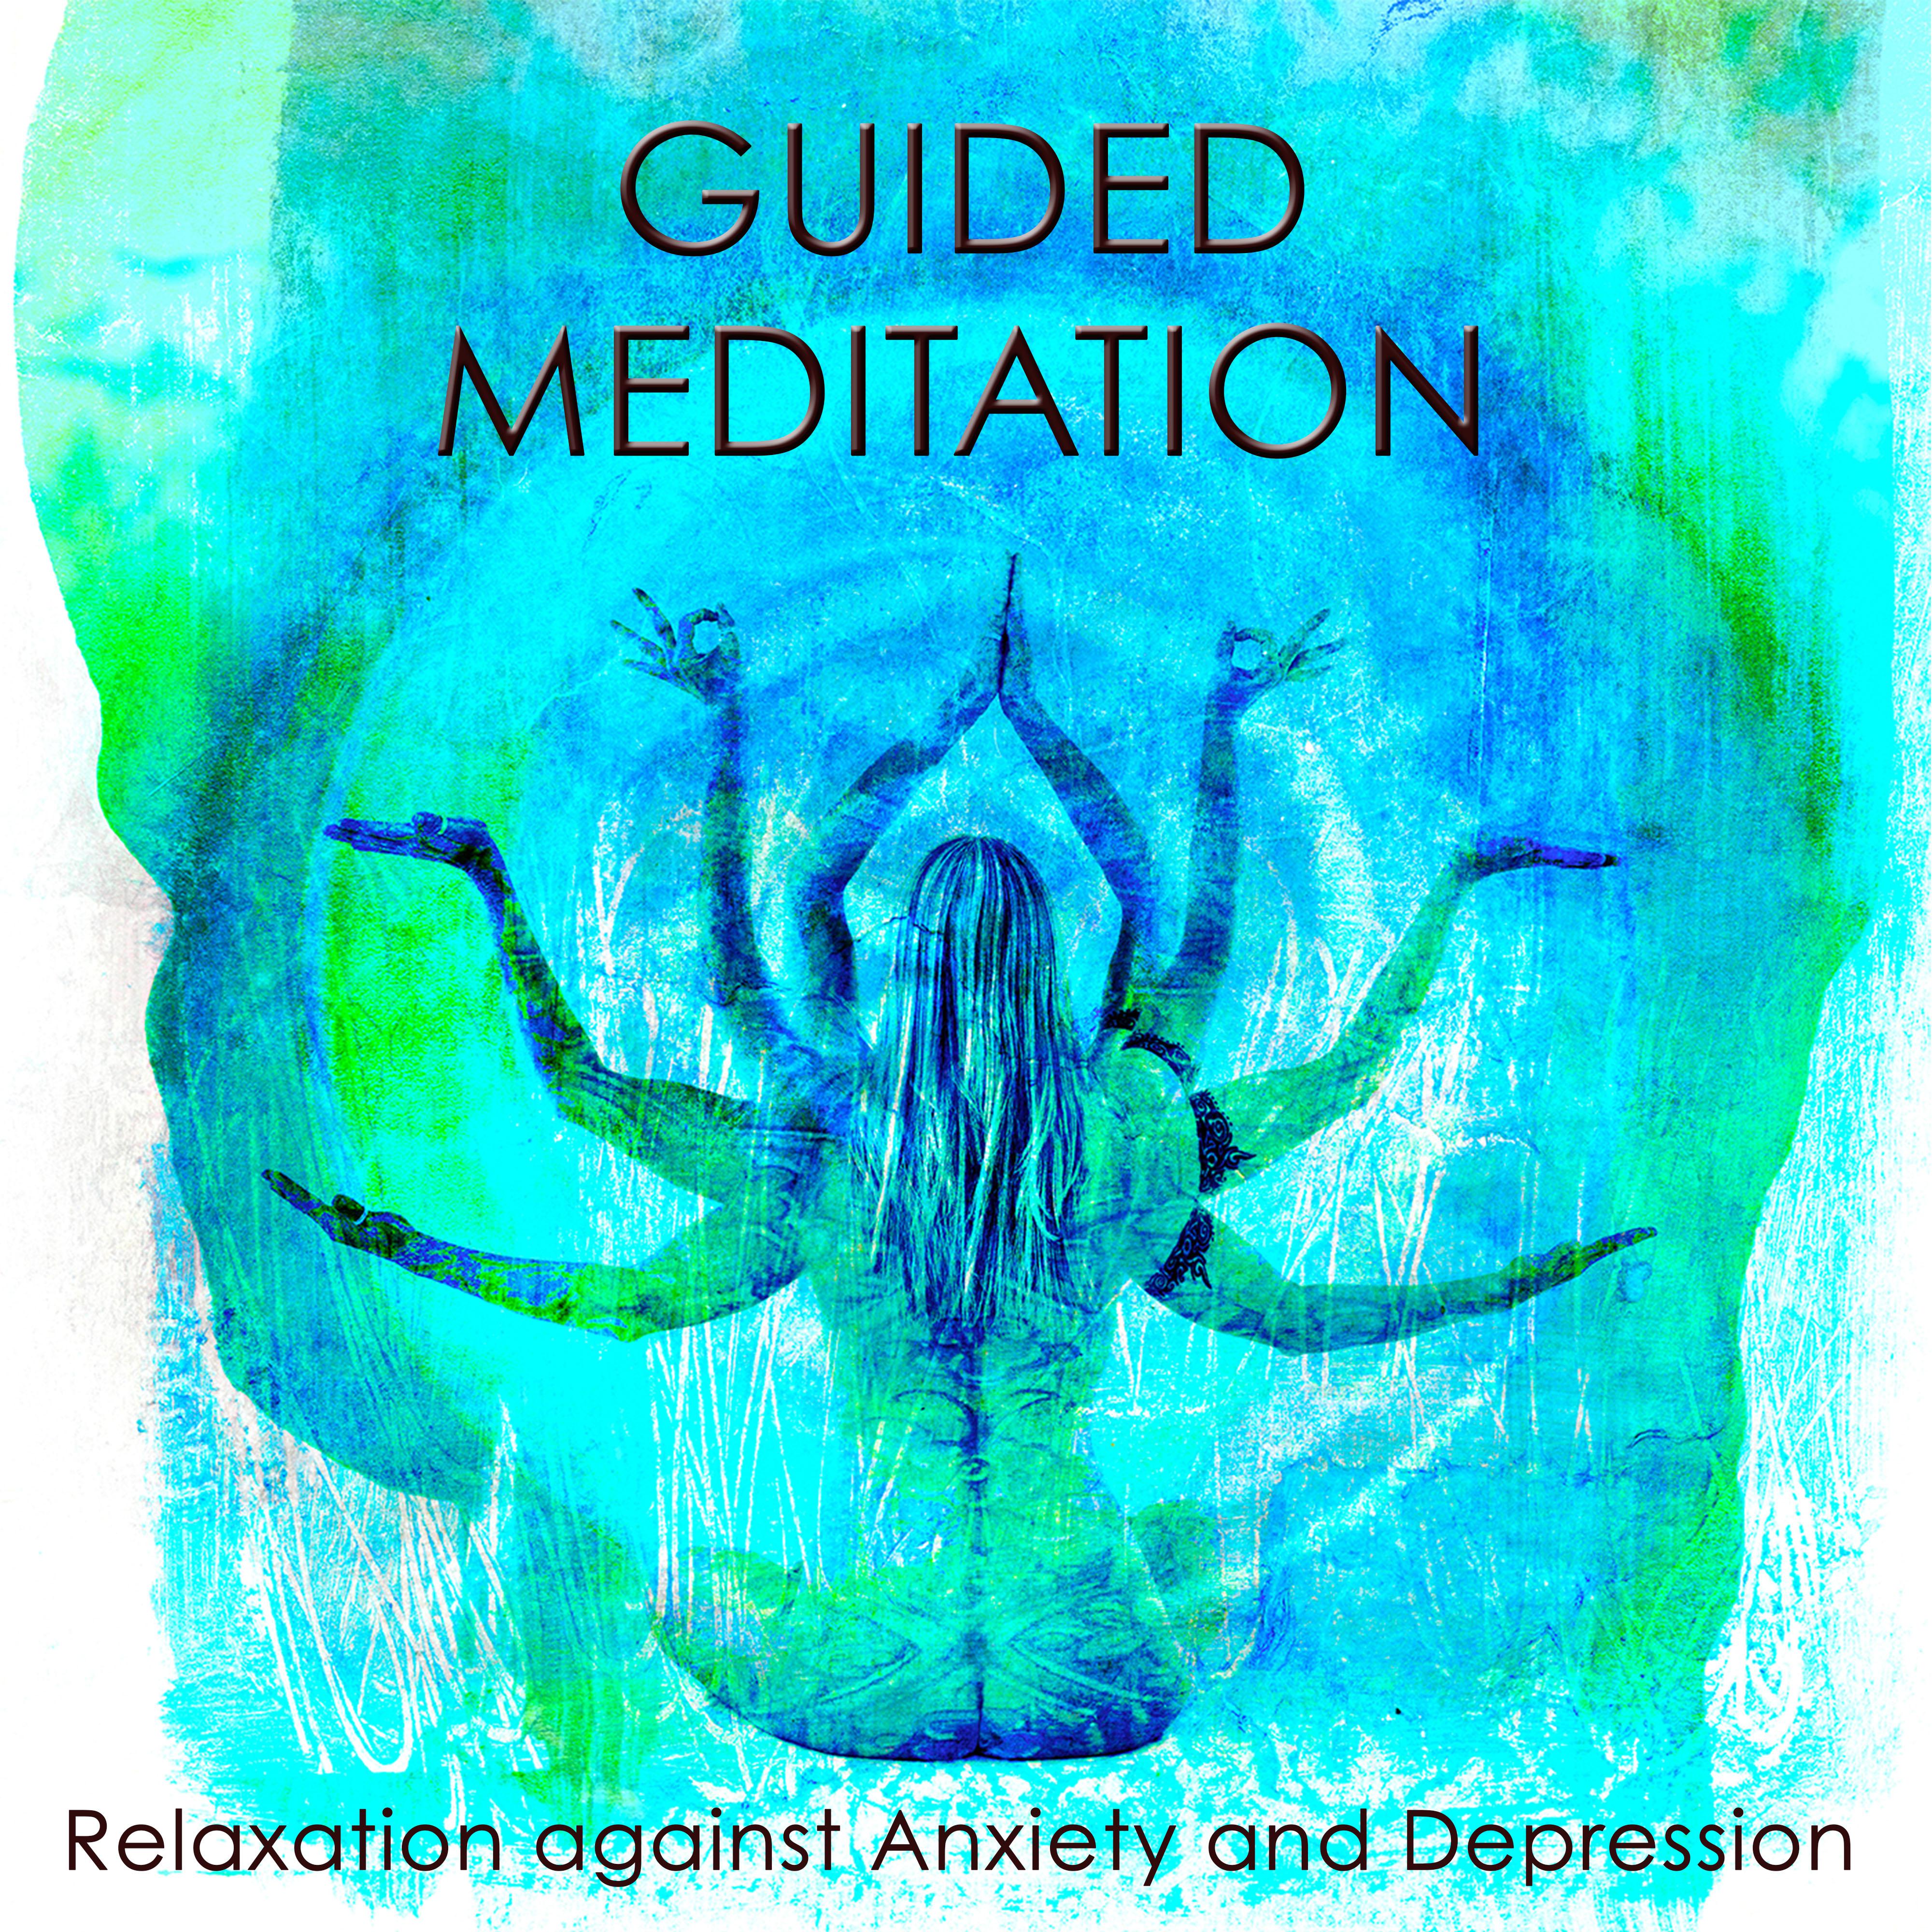 Guided Meditation for Relaxation against Anxiety and Depression